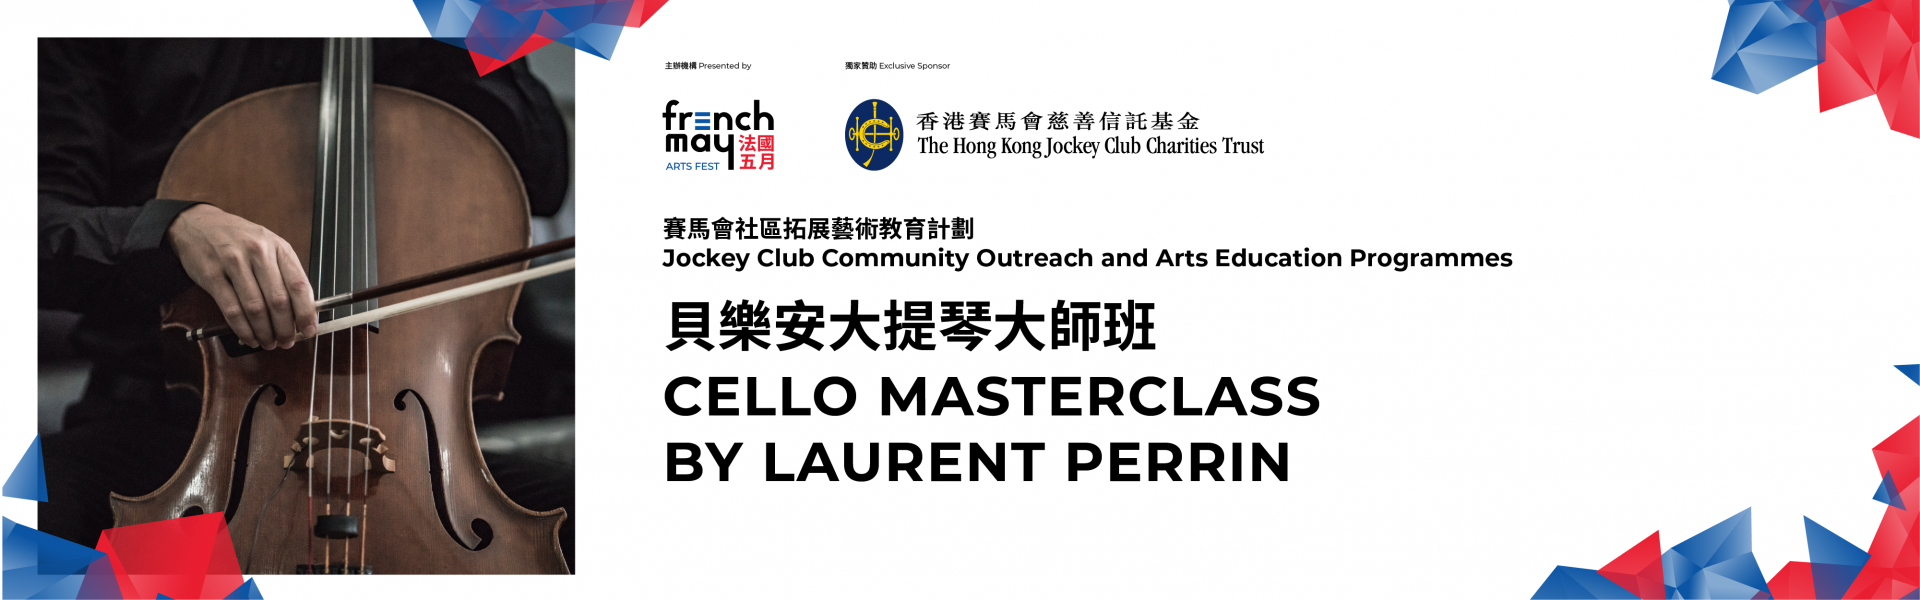 Cello Masterclass by Laurent Perrin